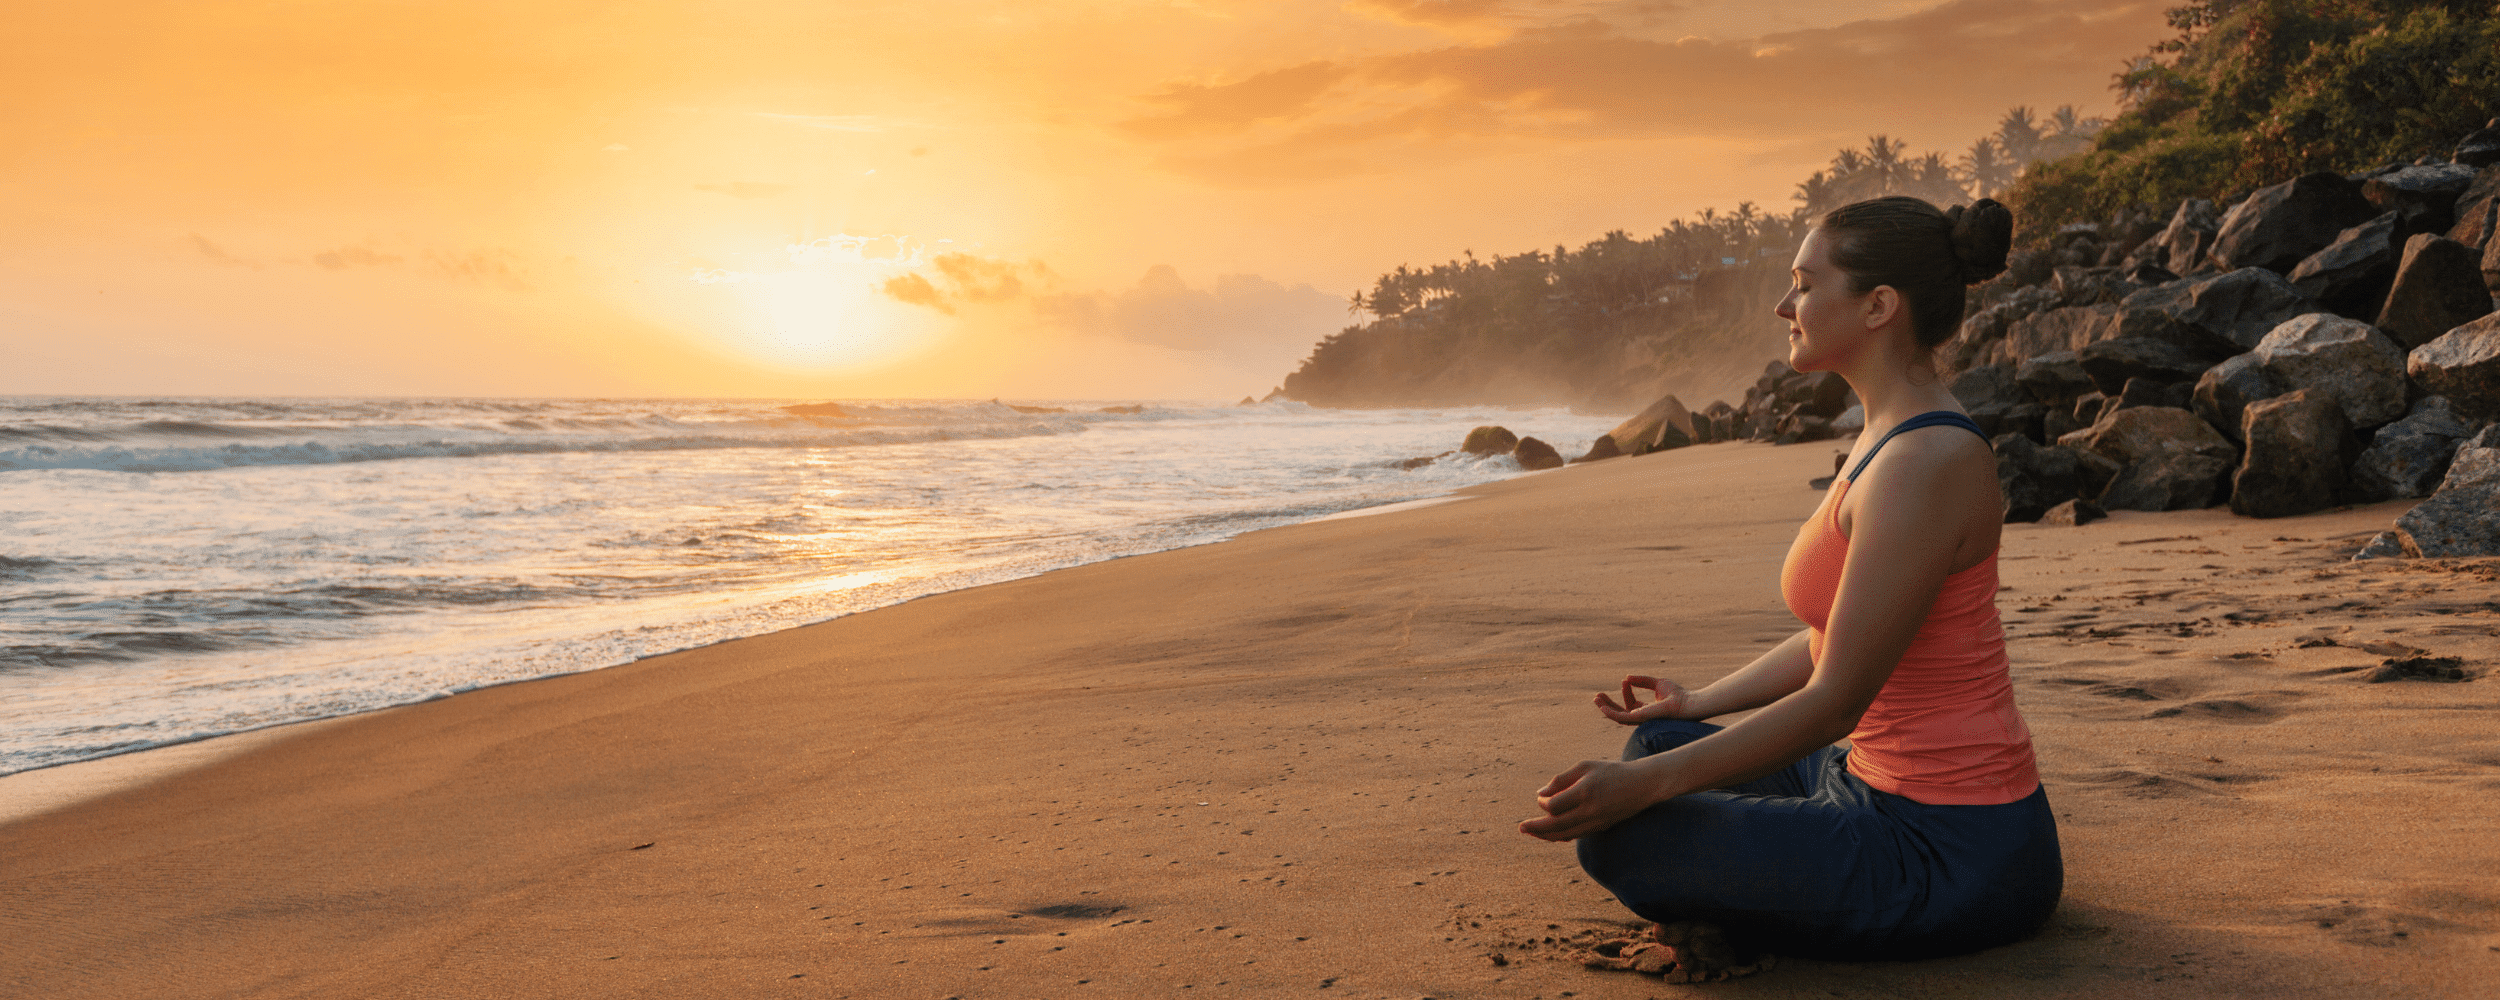 a woman practicing meditation on the beach